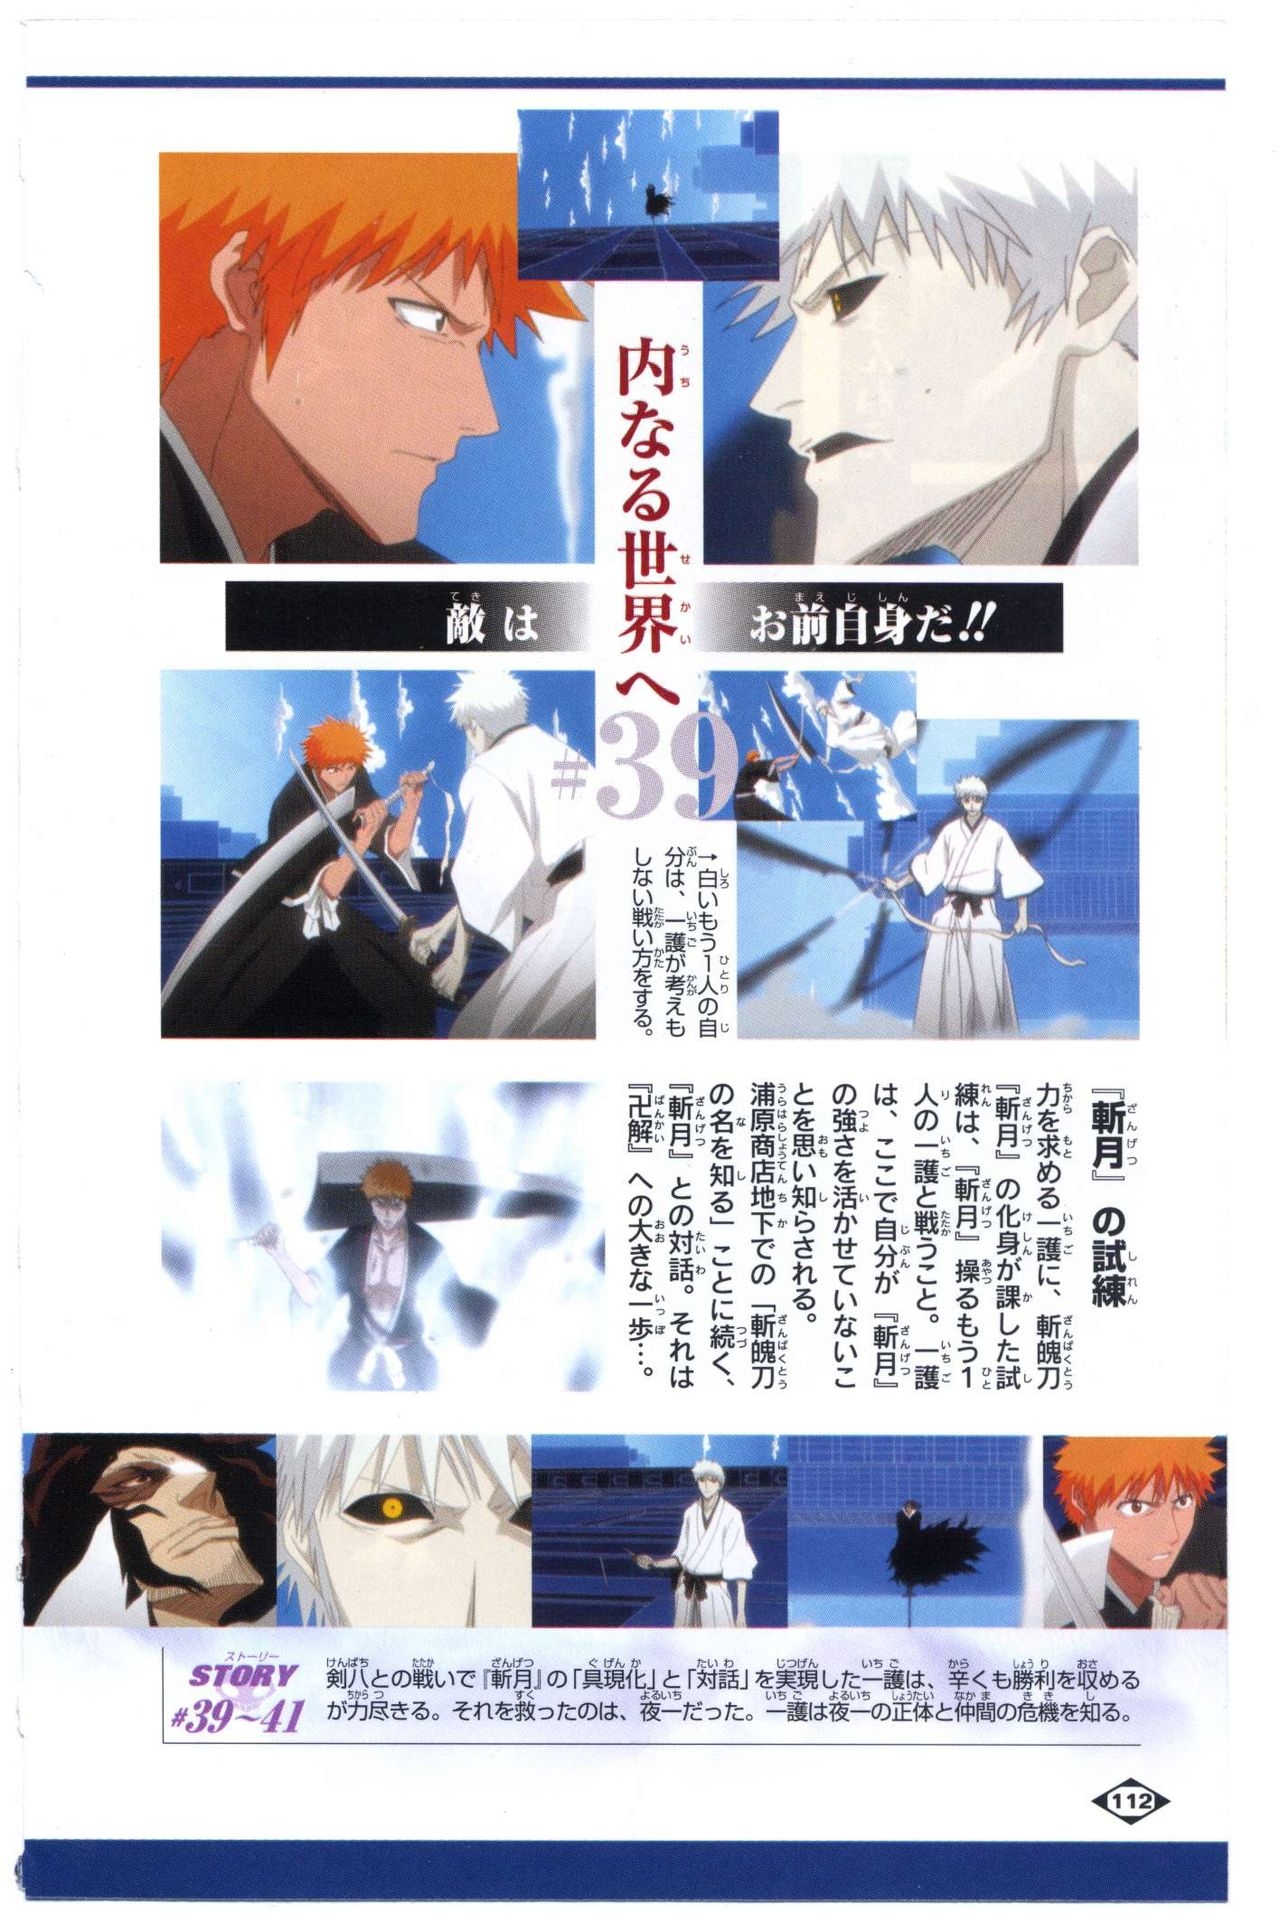 Bleach: Official Animation Book VIBEs 112